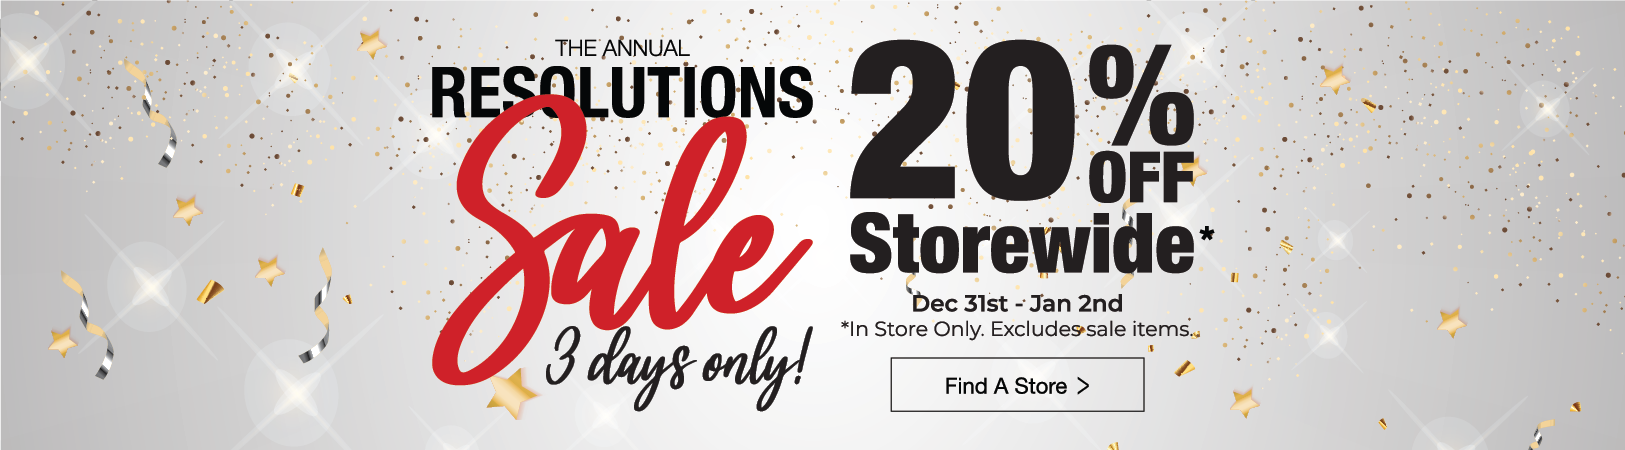 The Resolutions Sale - 3 Days Only!